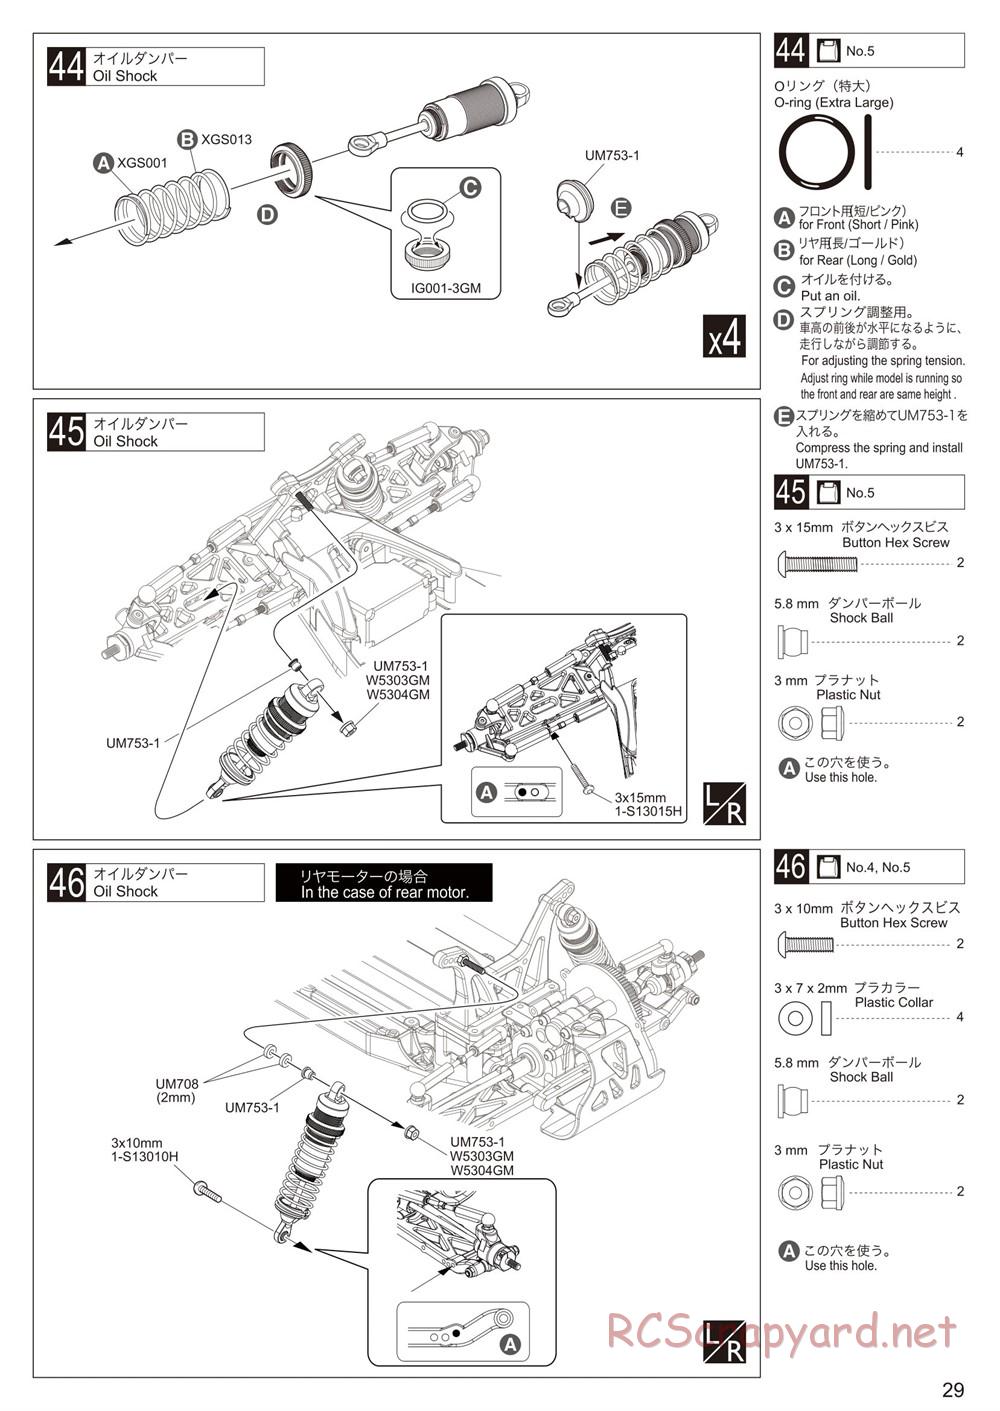 Kyosho - Ultima RB6 (2015) - Manual - Page 29